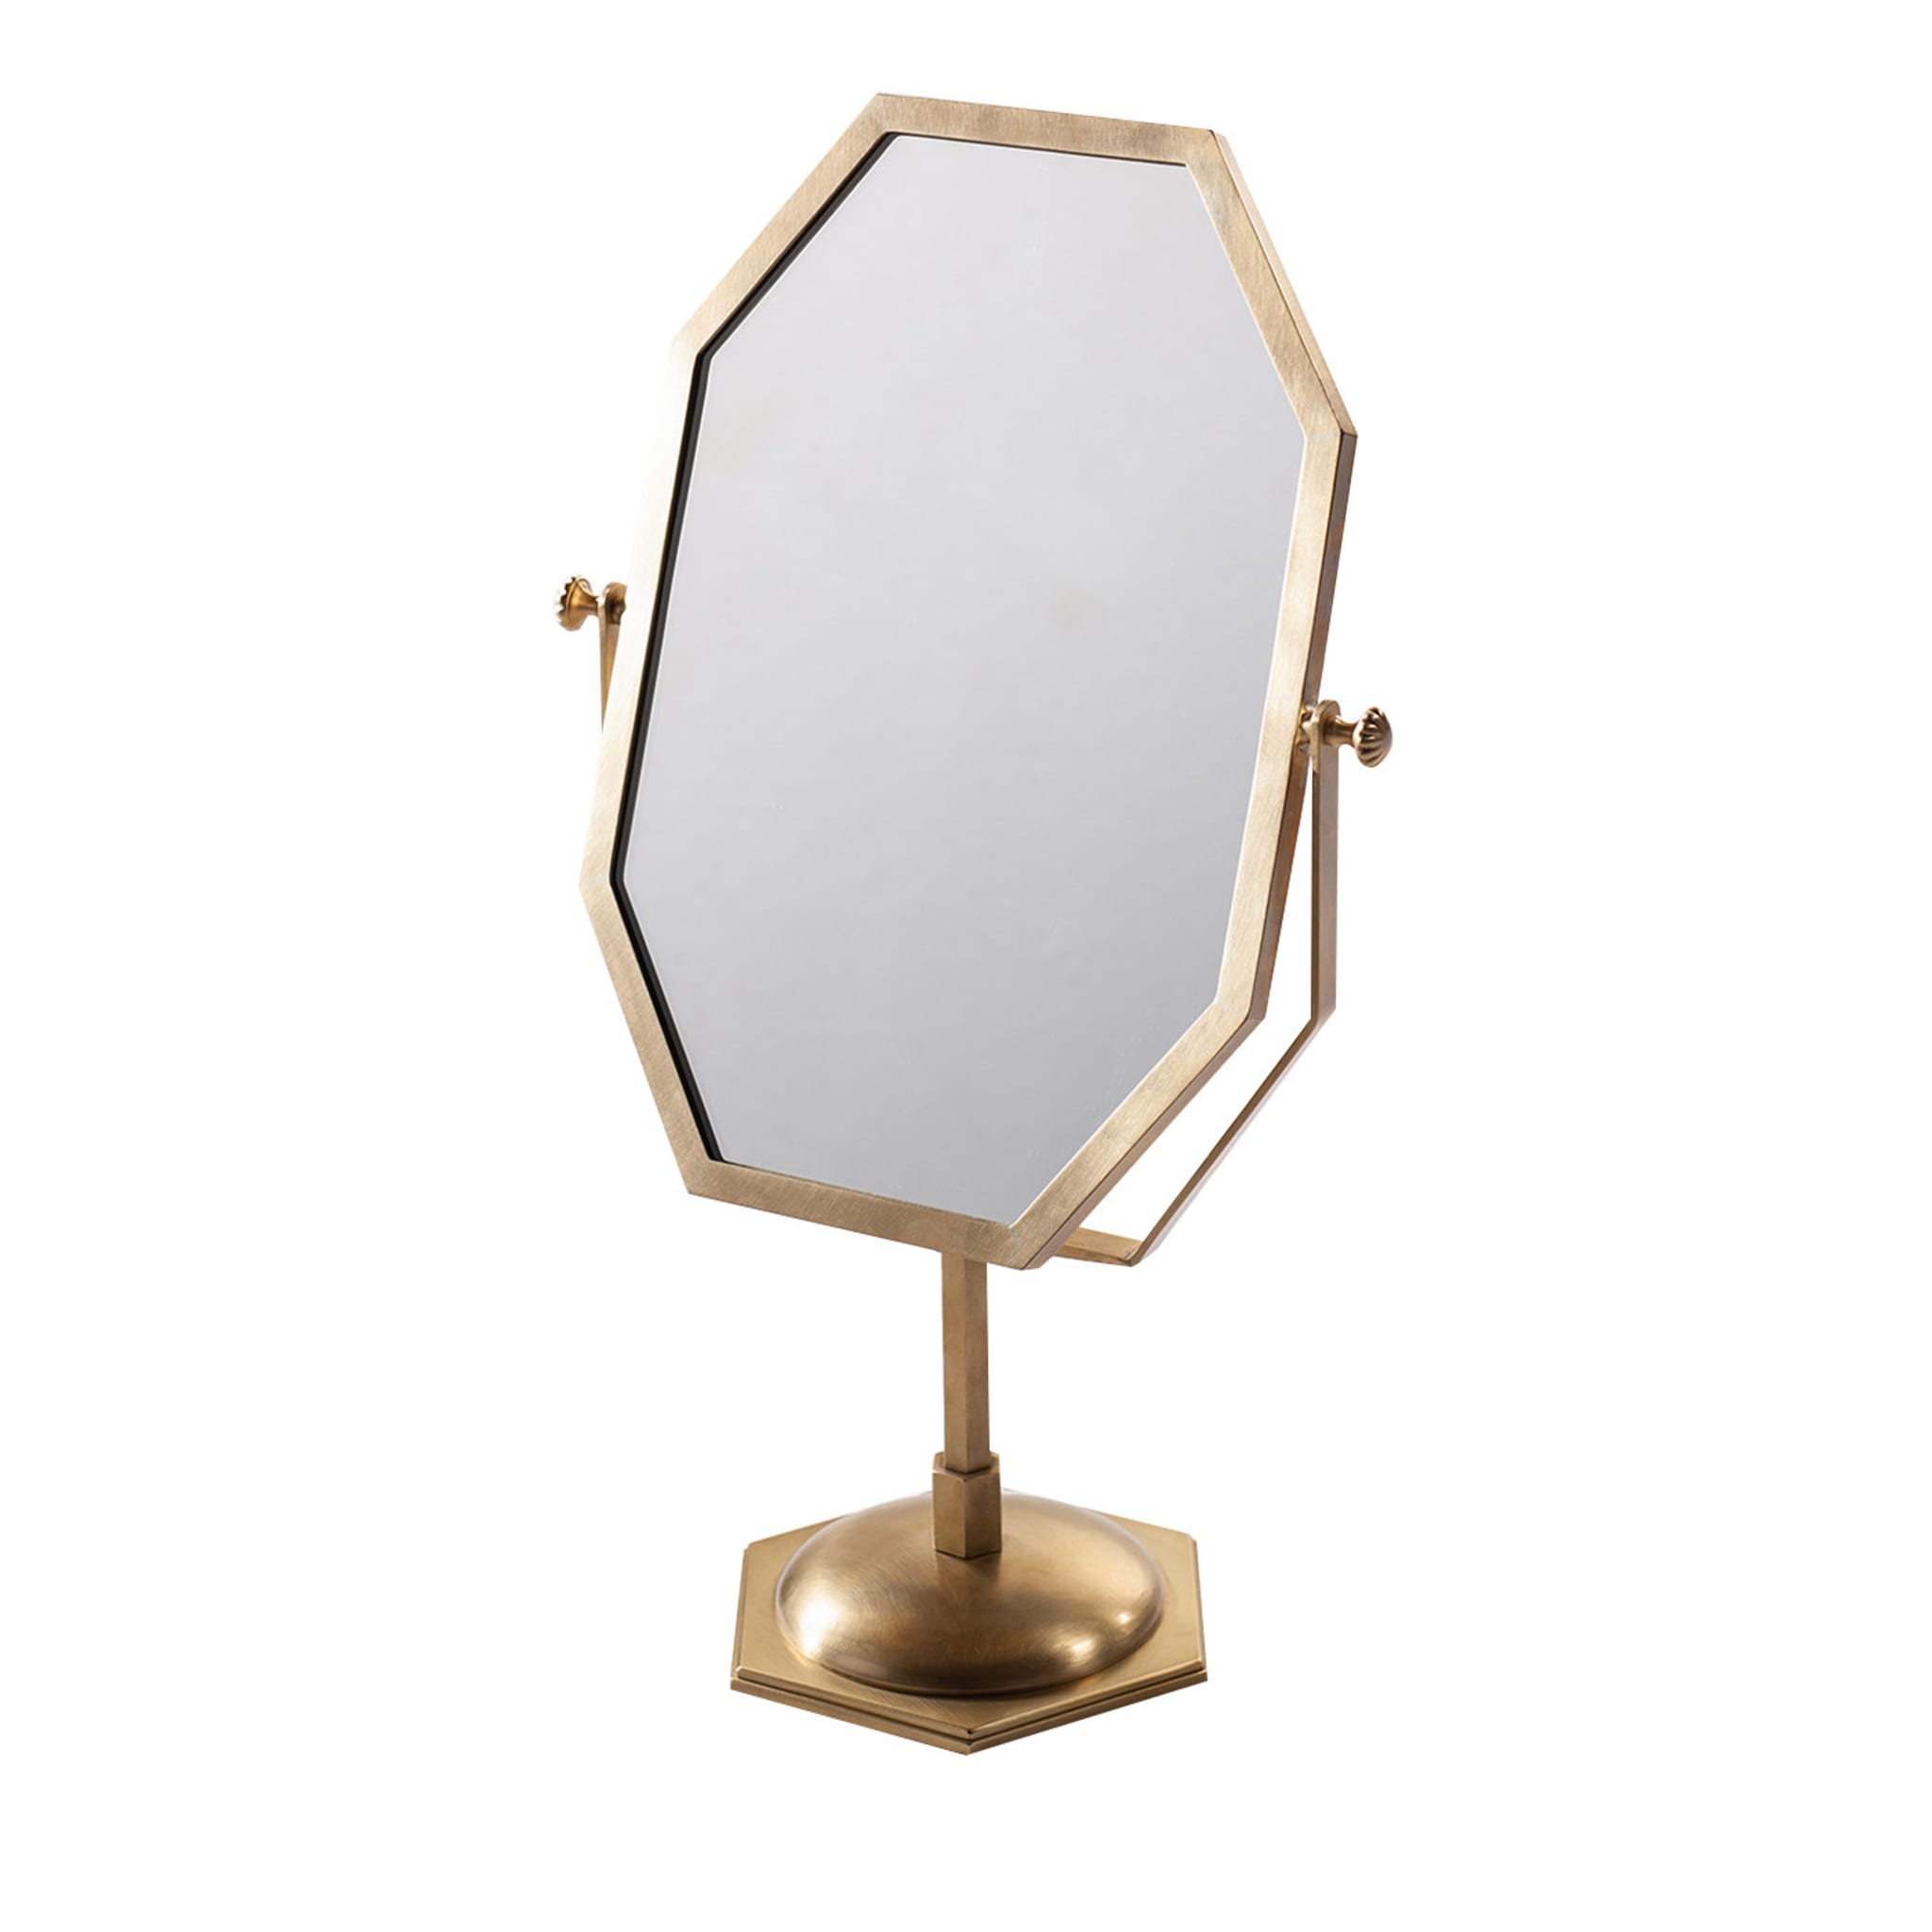 The Octagonal Small Vanity Mirror - Main view